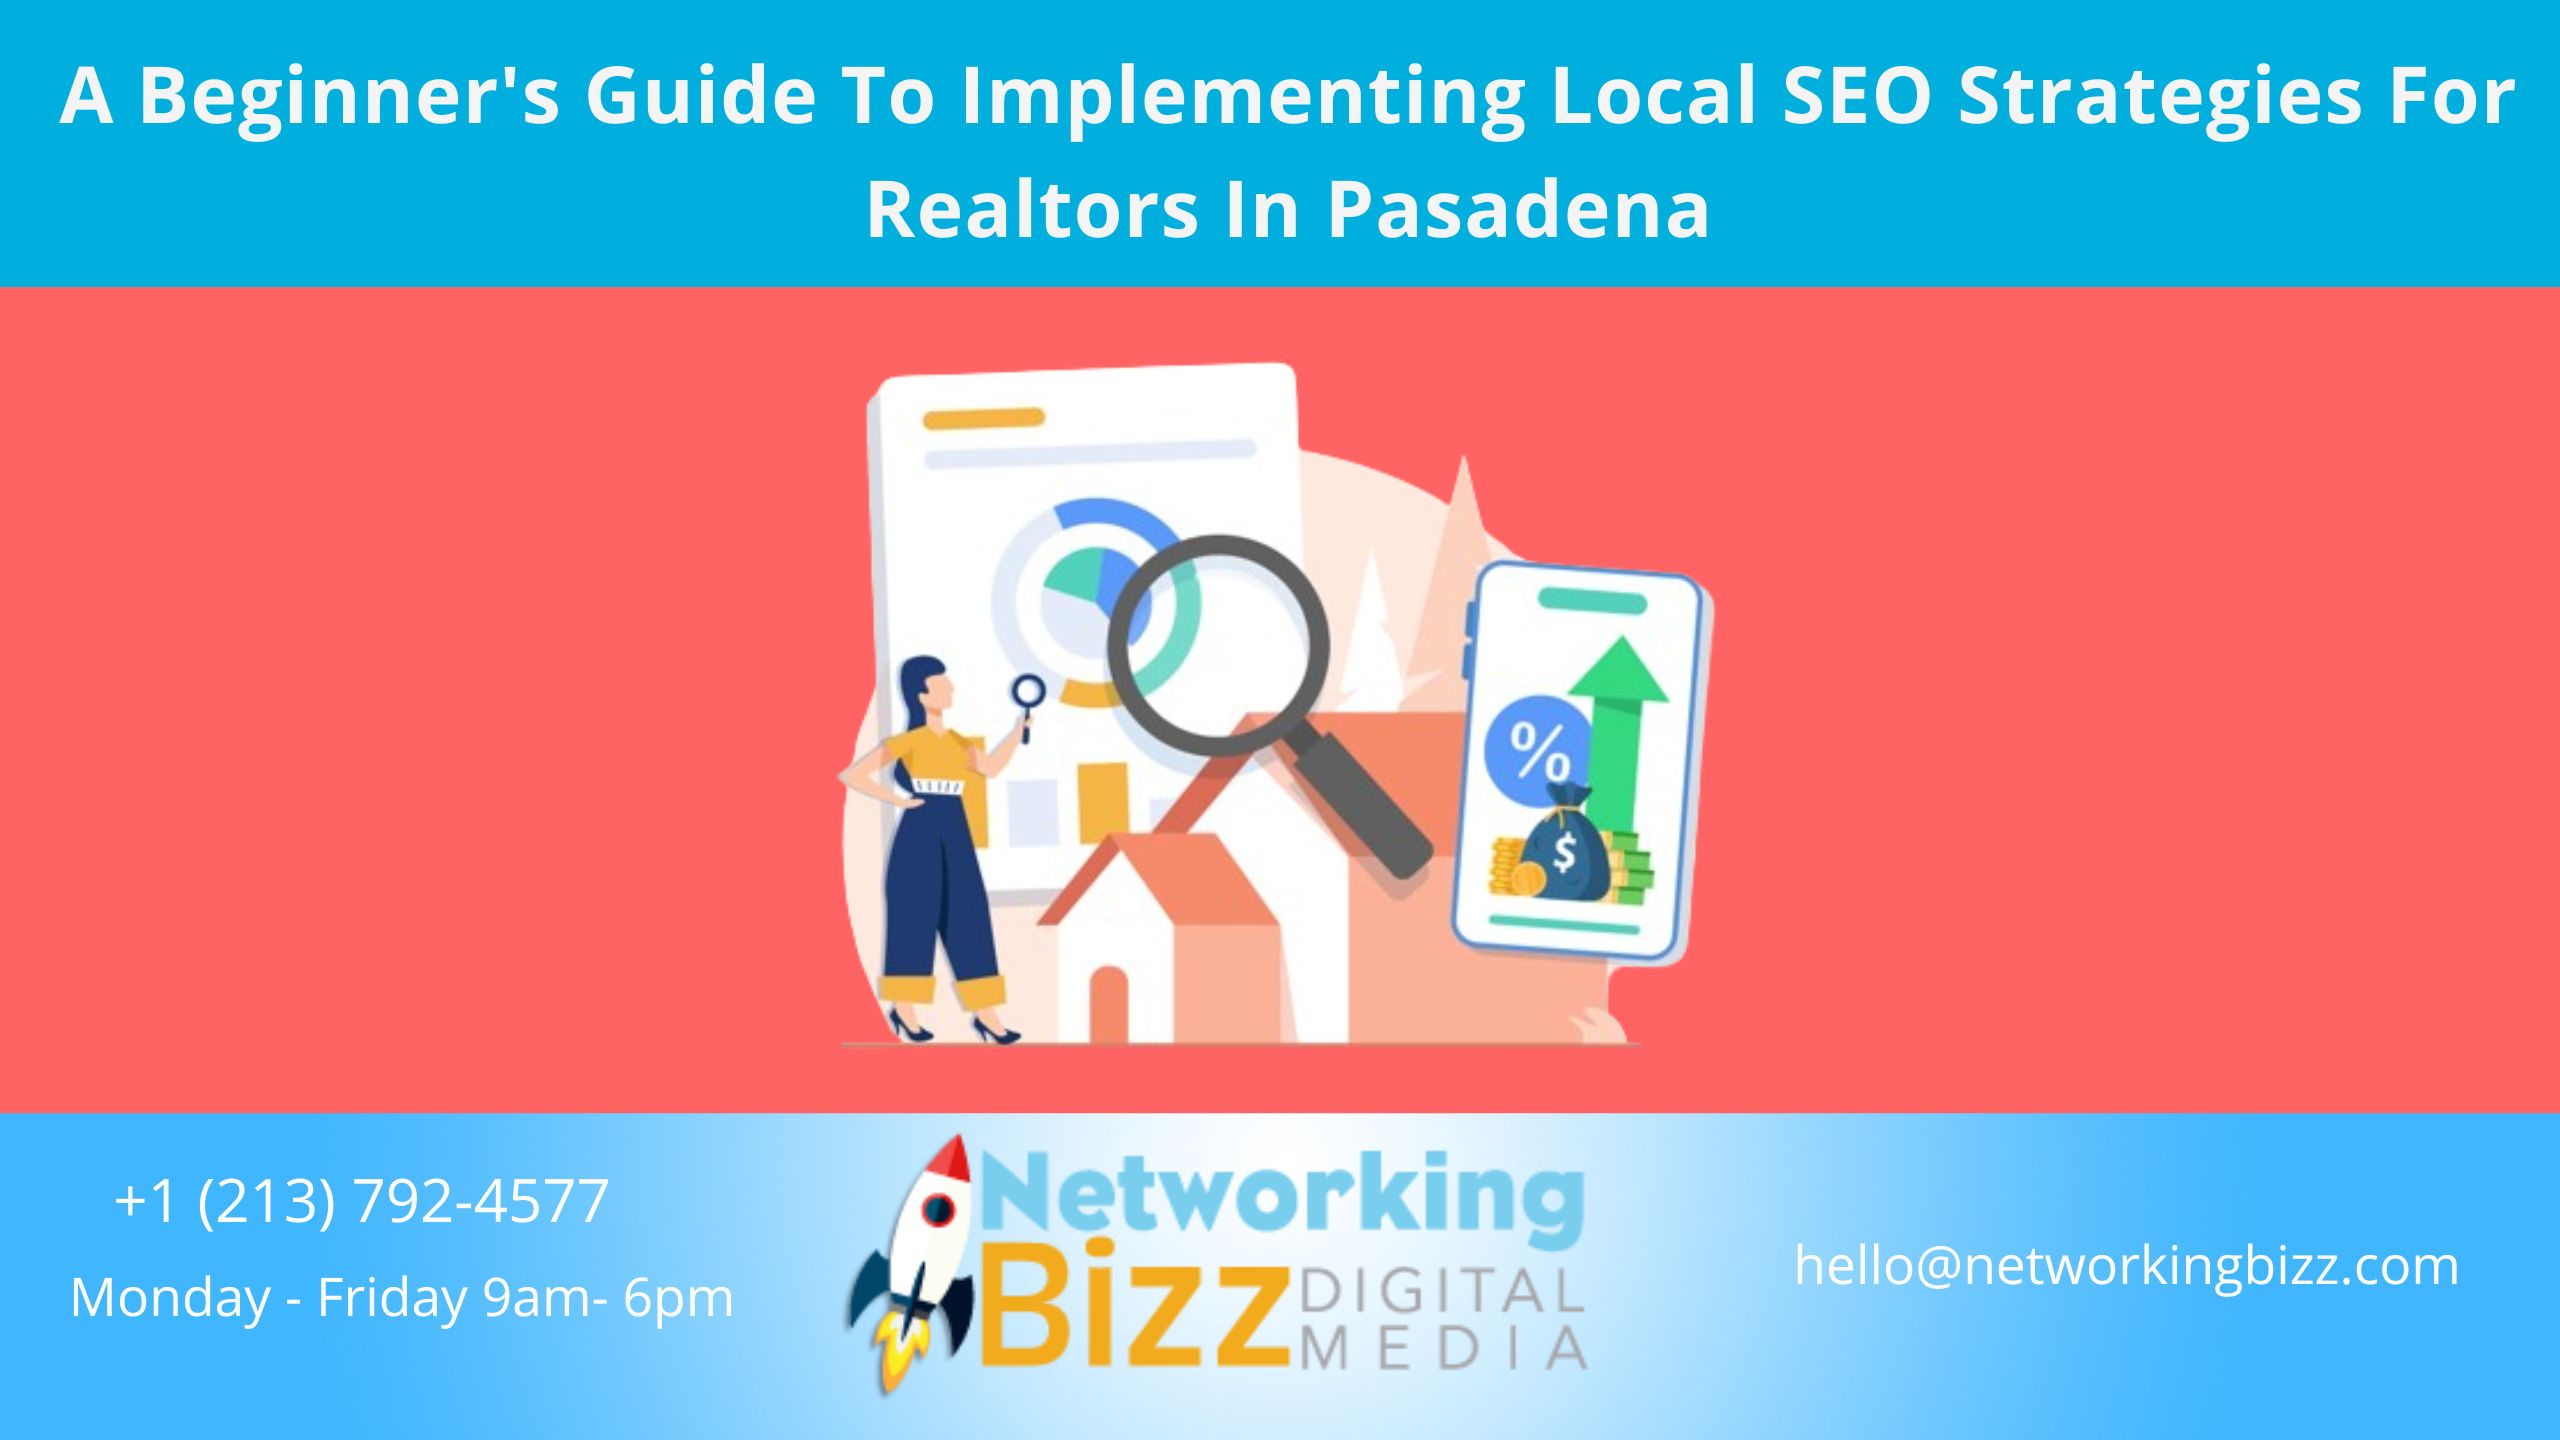 A Beginner’s Guide To Implementing Local SEO Strategies For Realtors In Pasadena